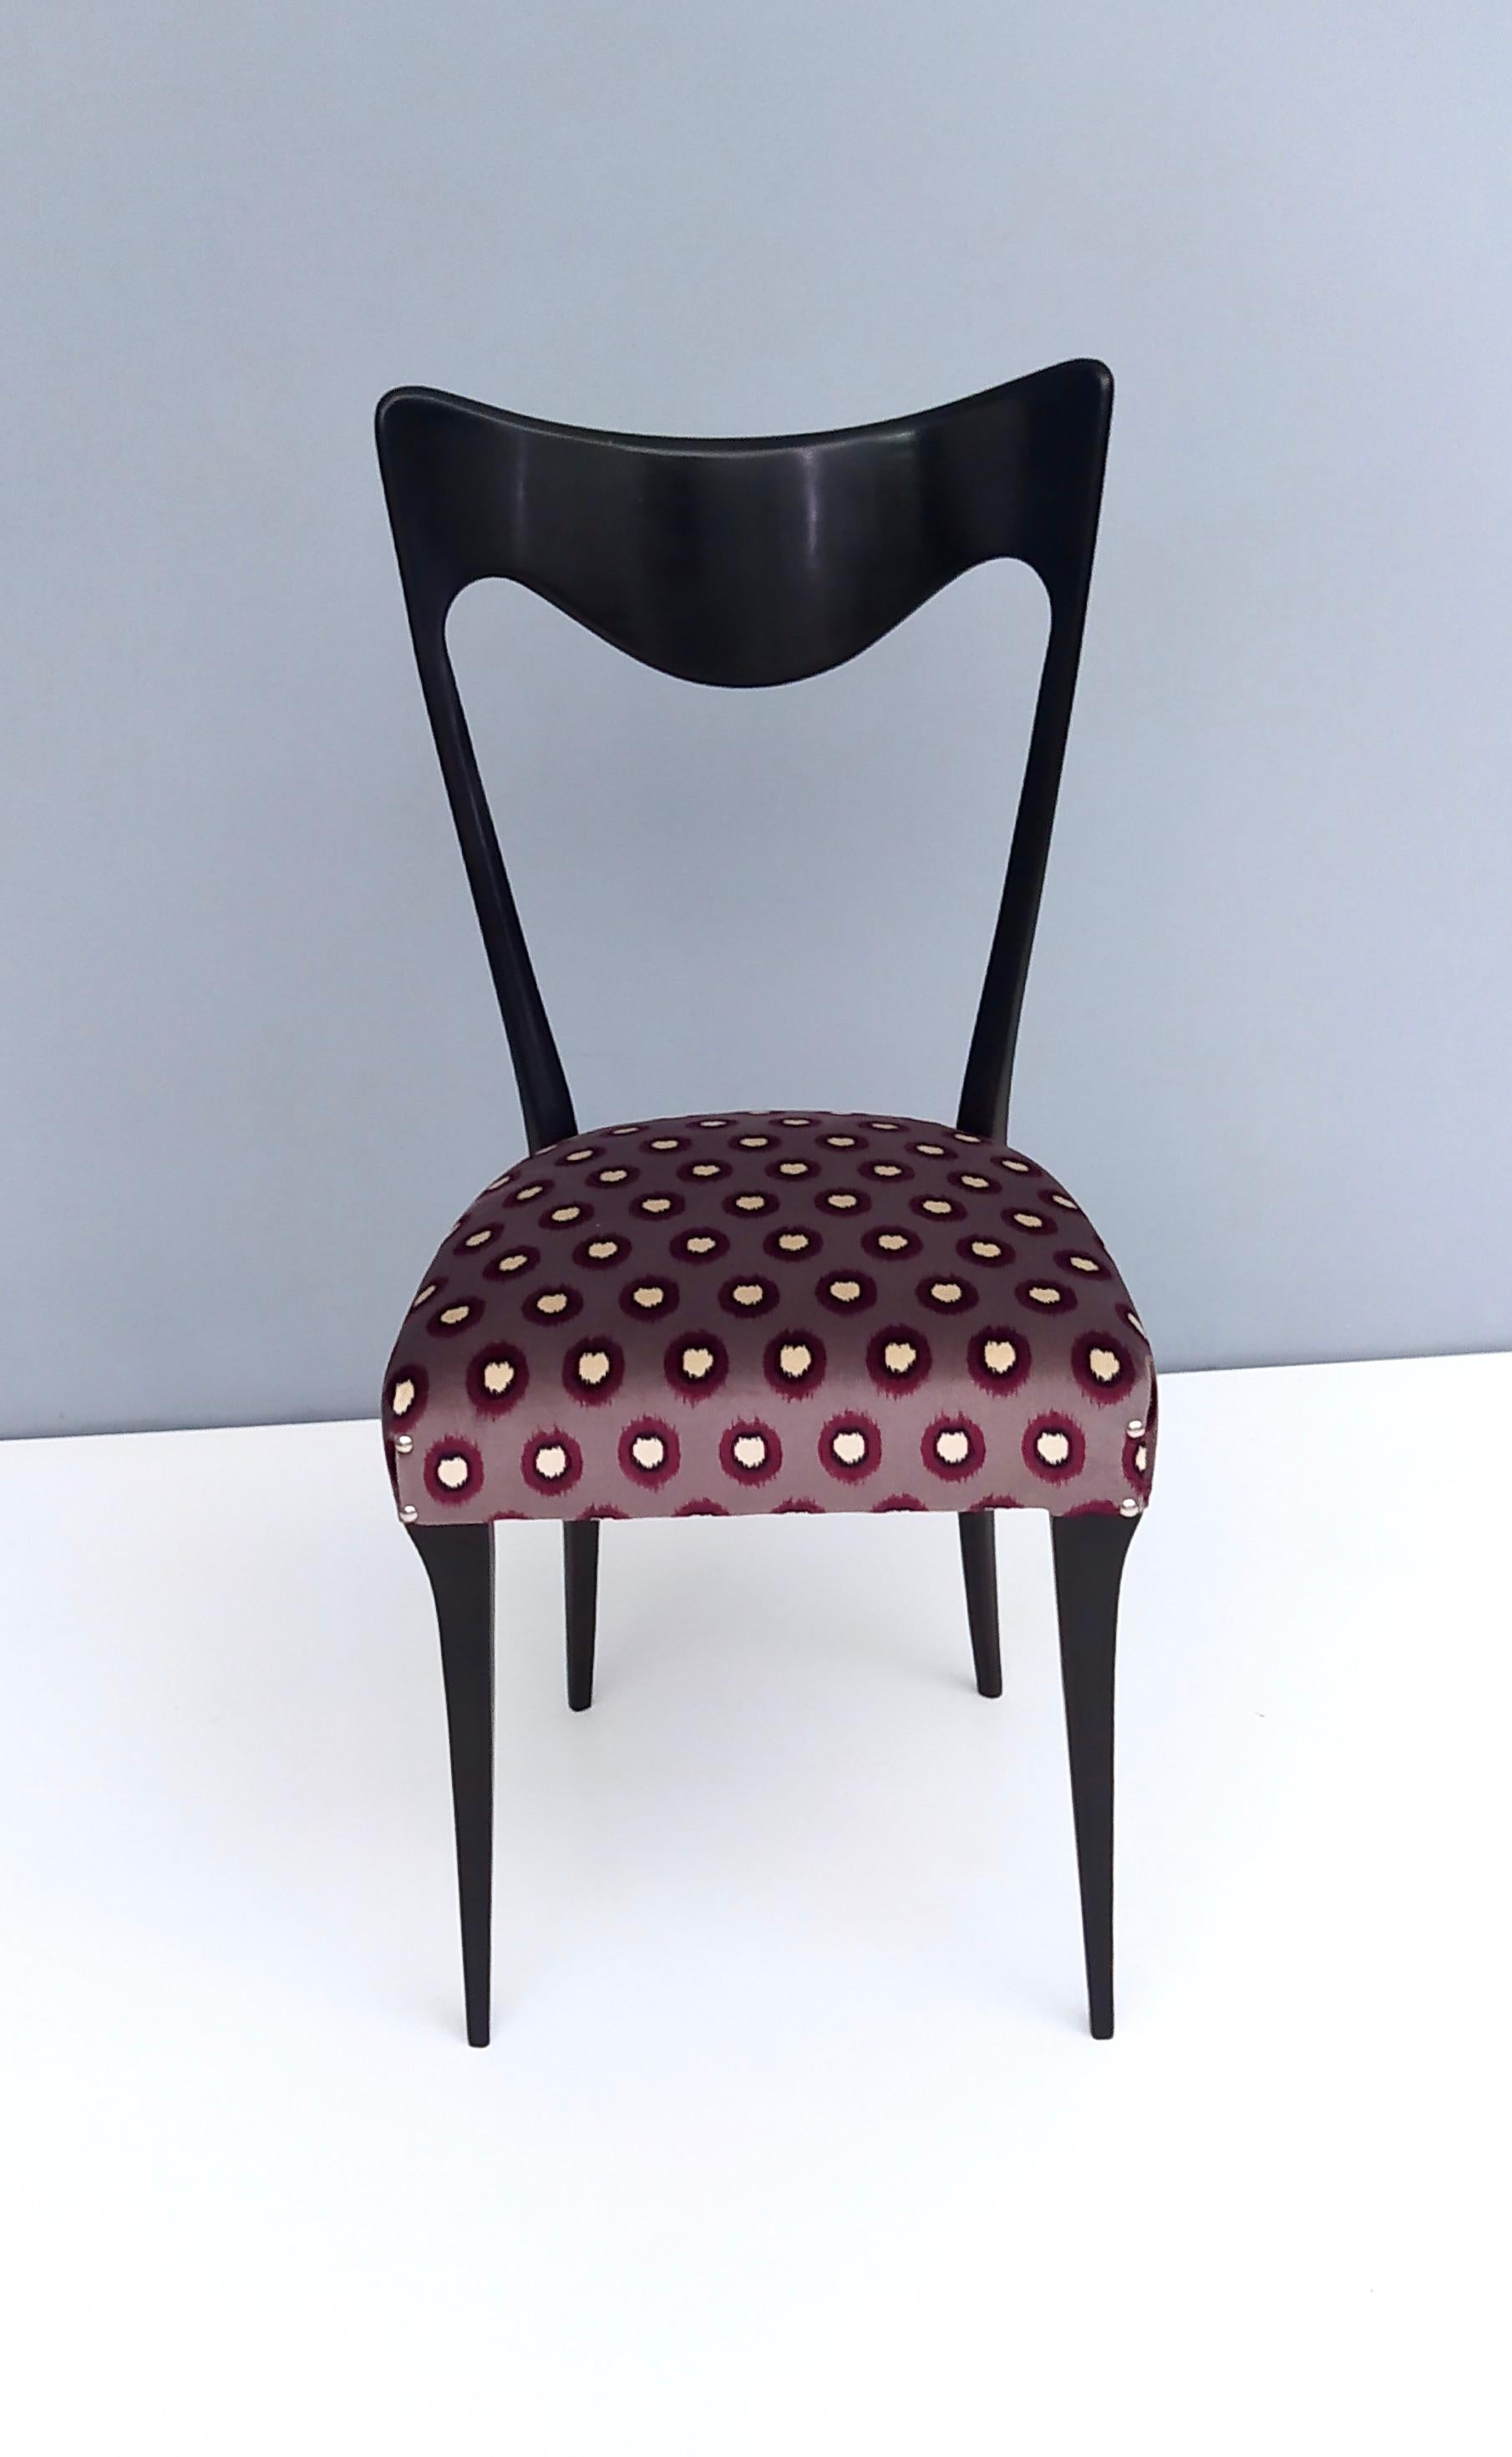 Mid-20th Century Set of Six Plum Purple Patterned Fabric Chairs by Carlo Enrico Rava, Italy 1950s